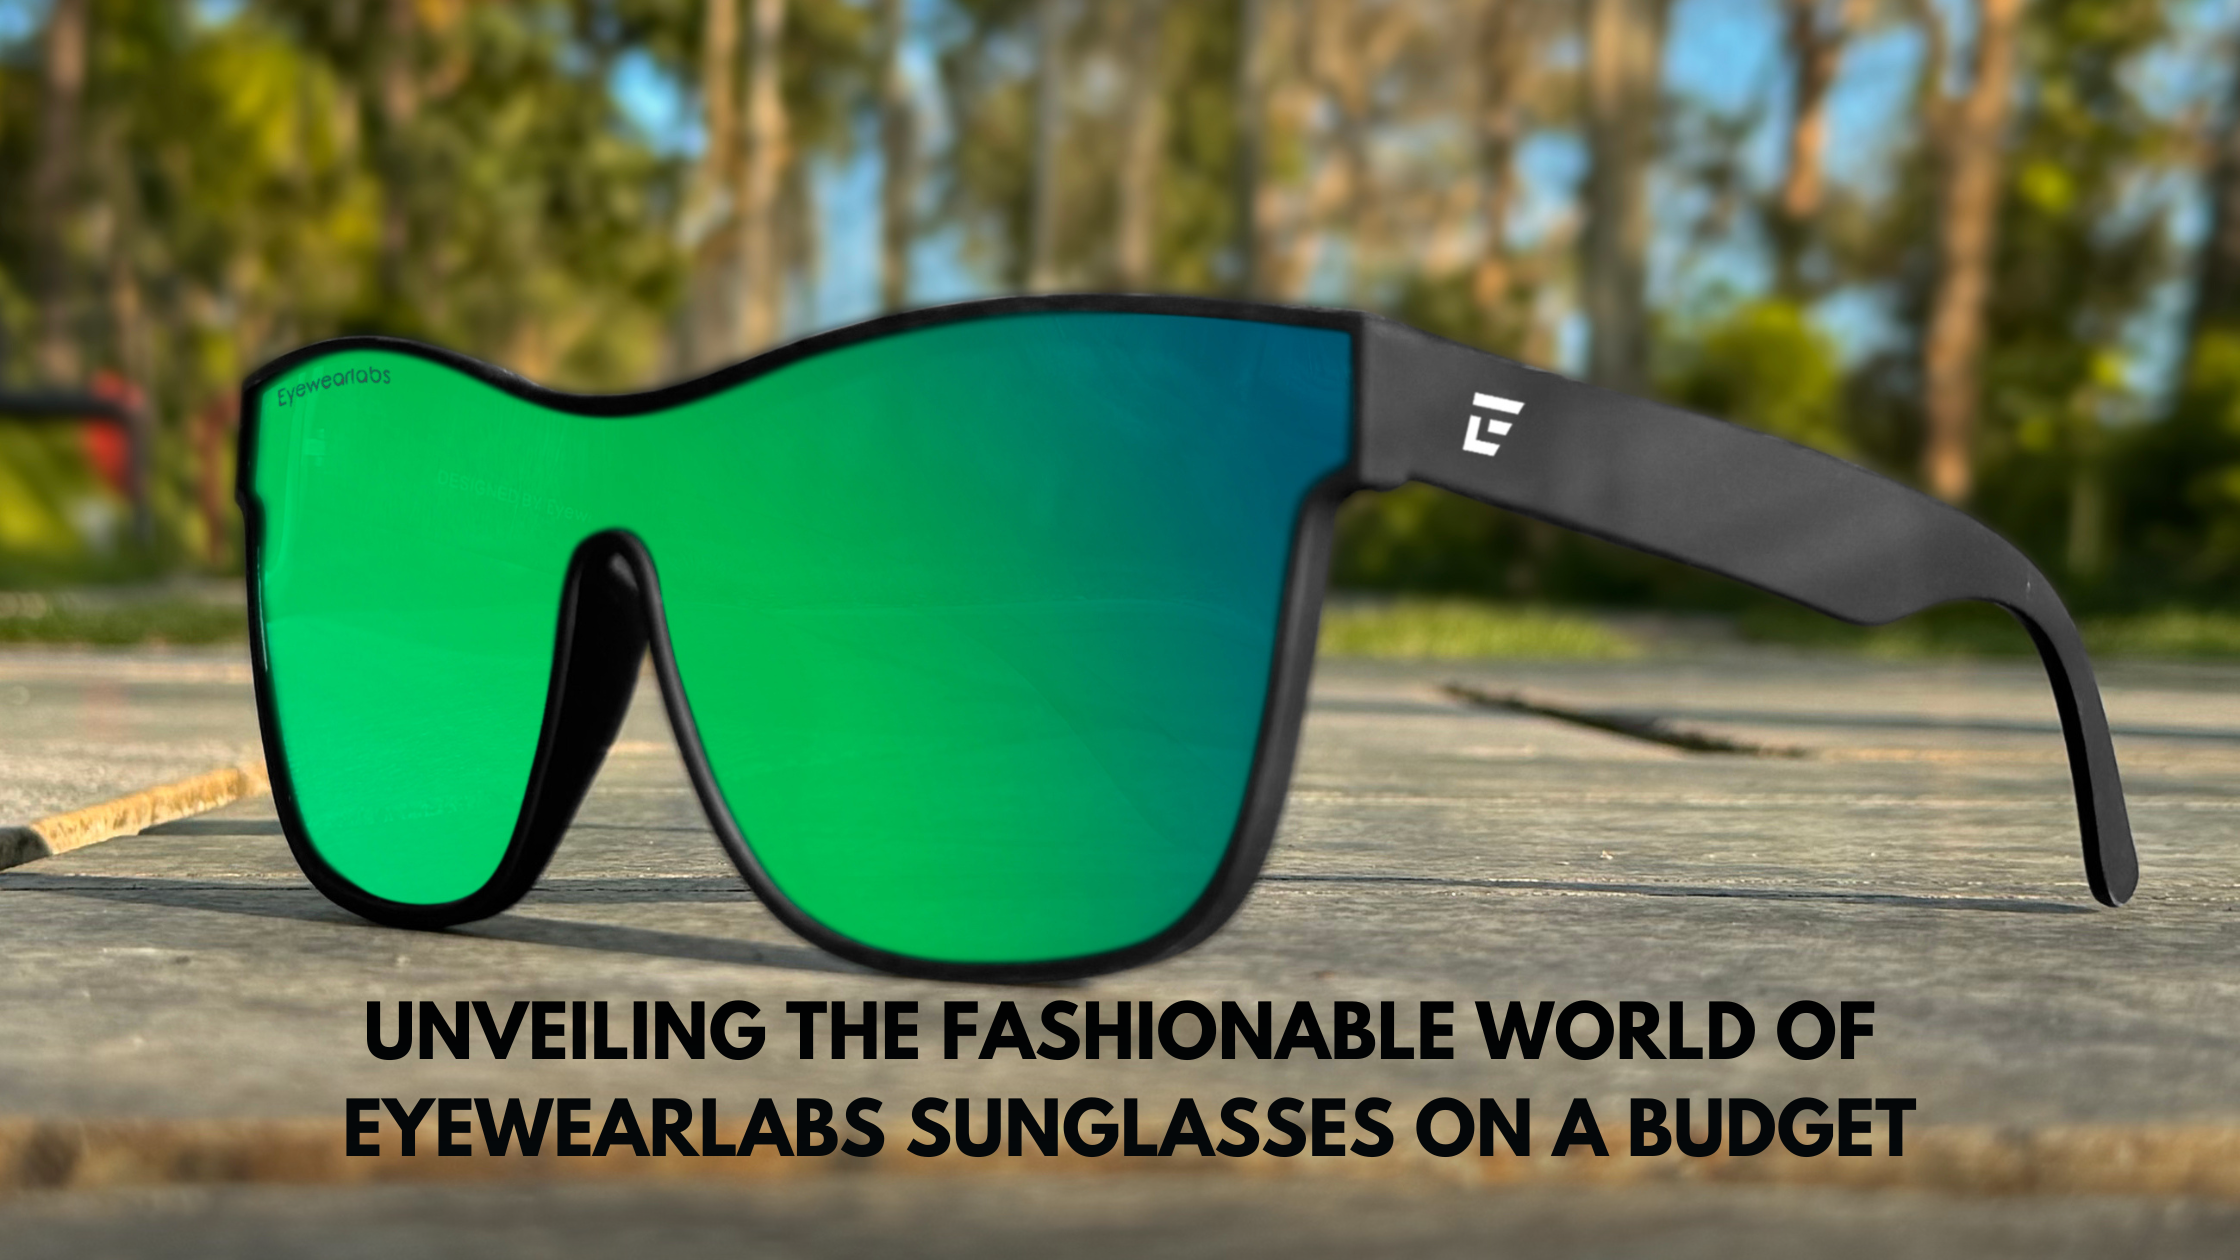 Unveiling the Fashionable World of Eyewearlabs Sunglasses on a Budget